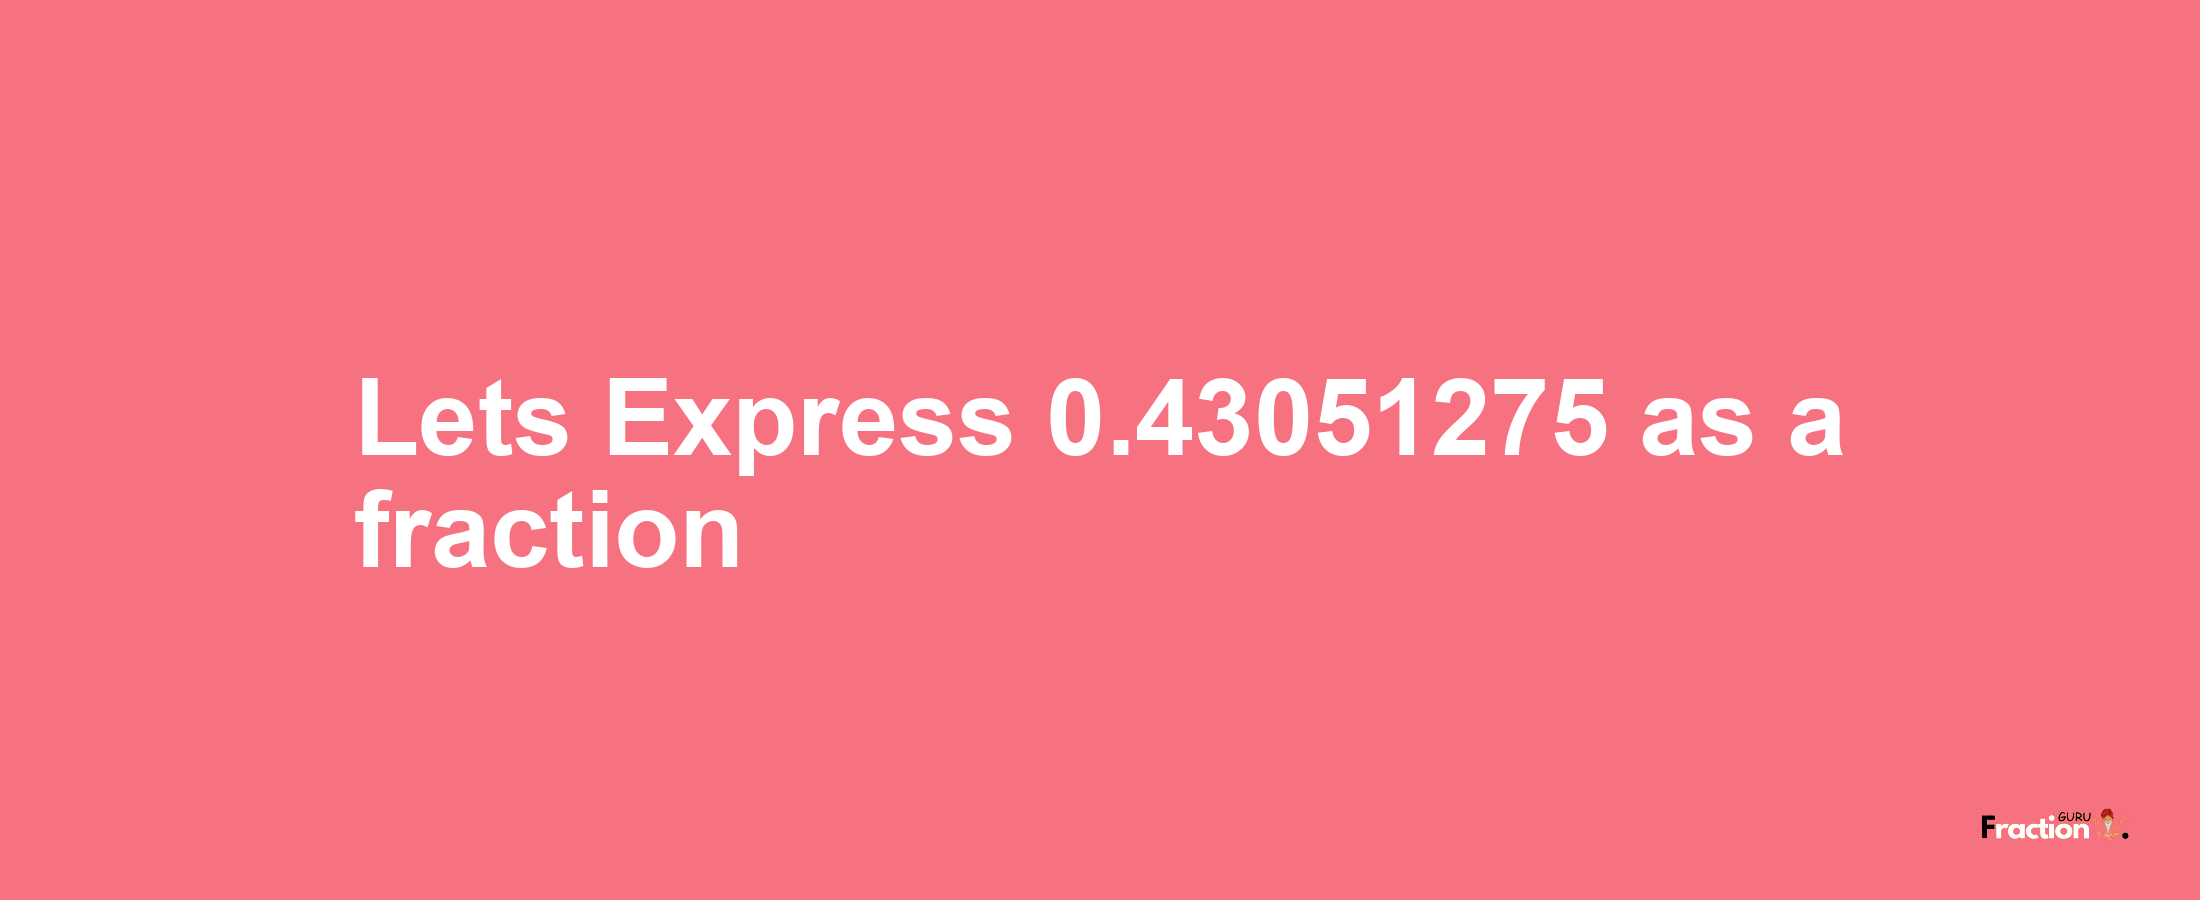 Lets Express 0.43051275 as afraction